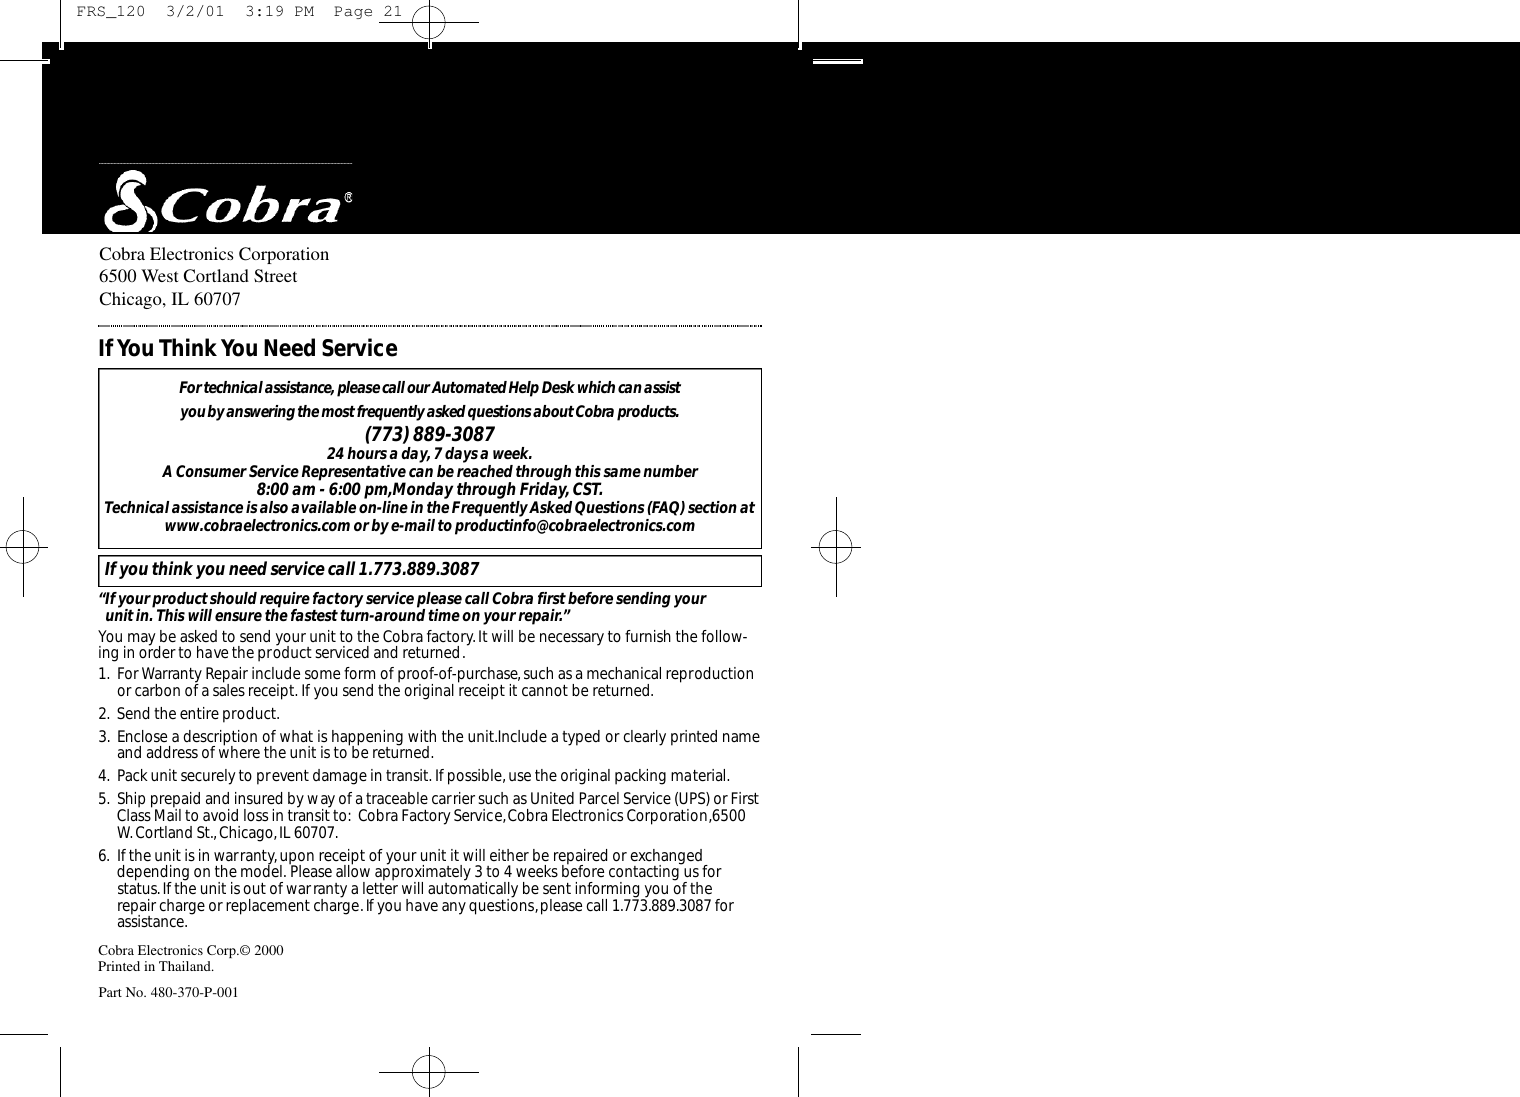 Cobra Electronics Corporation6500 West Cortland StreetChicago, IL 60707Cobra Electronics Corp.© 2000Printed in Thailand.Part No. 480-370-P-001For te c h n i c al assistance, please call our Au to m a t ed Help Desk which can assist you by answering the most fre q u e n t l y asked questions about Co b ra prod u ct s .(773) 889-3087 24 hours a day, 7 days a week.A Consumer Service Representative can be reached through this same number 8:00 am - 6:00 pm,Monday through Friday,CST.Technical assistance is also available on-line in the Frequently Asked Questions (FAQ) section atwww.cobraelectronics.com or by e-mail to productinfo@cobraelectronics.comIf you think you need service call 1.773.889.3087“If your product should require factory service please call Cobra first before sending your unit in. This will ensure the fastest turn-around time on your repair.”You may be asked to send your unit to the Cobra factory.It will be necessary to furnish the follow-ing in order to have the product serviced and returned.1. For Warranty Repair include some form of proof-of-purchase, such as a mechanical reproductionor carbon of a sales receipt. If you send the original receipt it cannot be returned.2. Send the entire product.3. Enclose a description of what is happening with the unit.Include a typed or clearly printed nameand address of where the unit is to be returned.4. Pack unit securely to prevent damage in transit. If possible, use the original packing material.5. Ship prepaid and insured by way of a traceable carrier such as United Parcel Service (UPS) or FirstClass Mail to avoid loss in transit to: Cobra Factory Service,Cobra Electronics Corporation,6500W. Cortland St.,Chicago,IL 60707.6. If the unit is in warranty, upon receipt of your unit it will either be repaired or exchangeddepending on the model. Please allow approximately 3 to 4 weeks before contacting us for status.If the unit is out of warranty a letter will automatically be sent informing you of the repair charge or replacement charge.If you have any questions,please call 1.773.889.3087 forassistance.If You Think You Need Service FRS_120  3/2/01  3:19 PM  Page 21